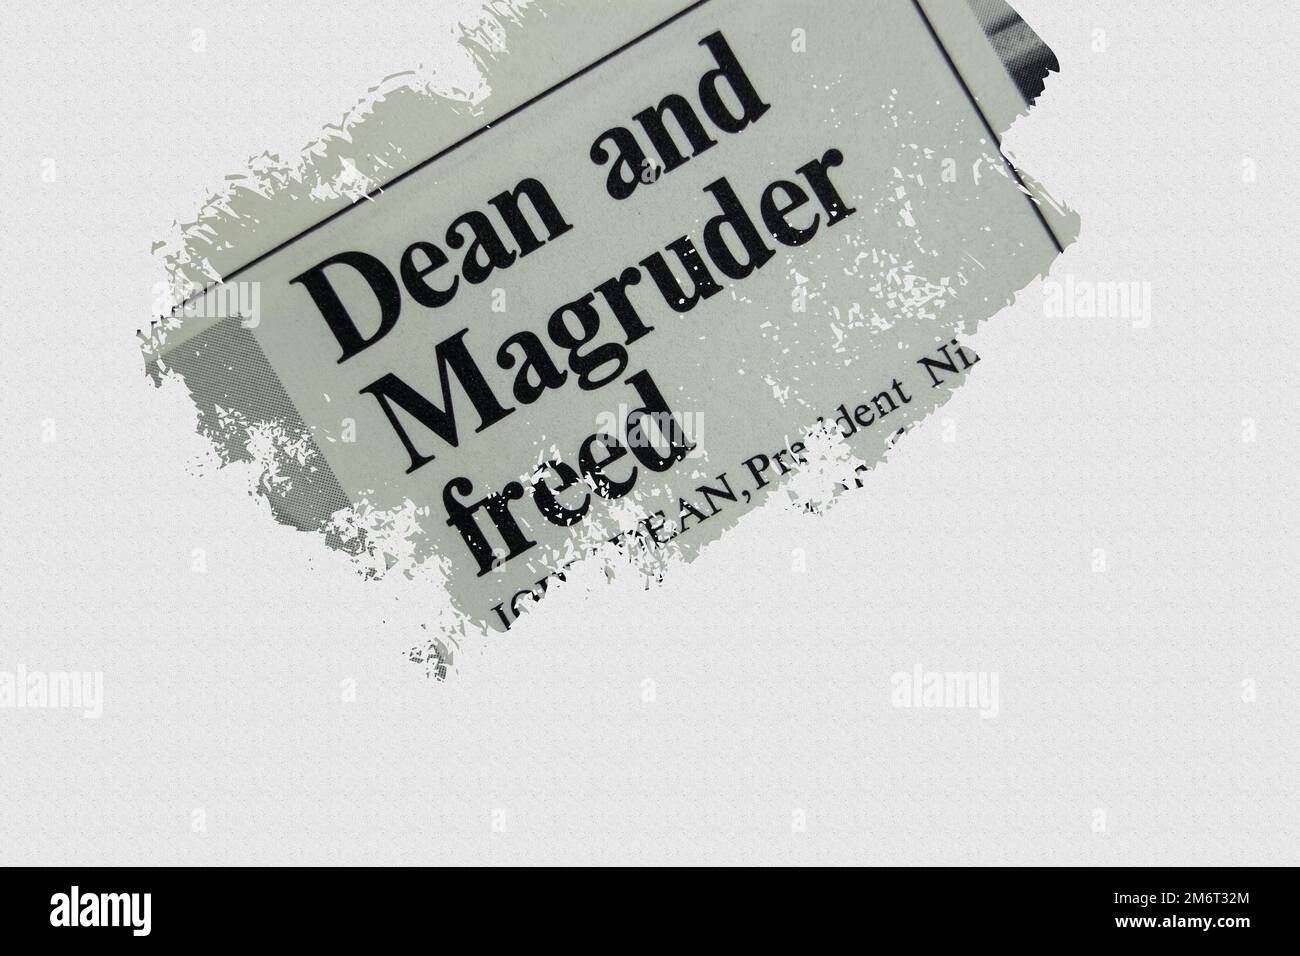 news story from 1975 newspaper headline article title - Dean and Magruder freed Stock Photo